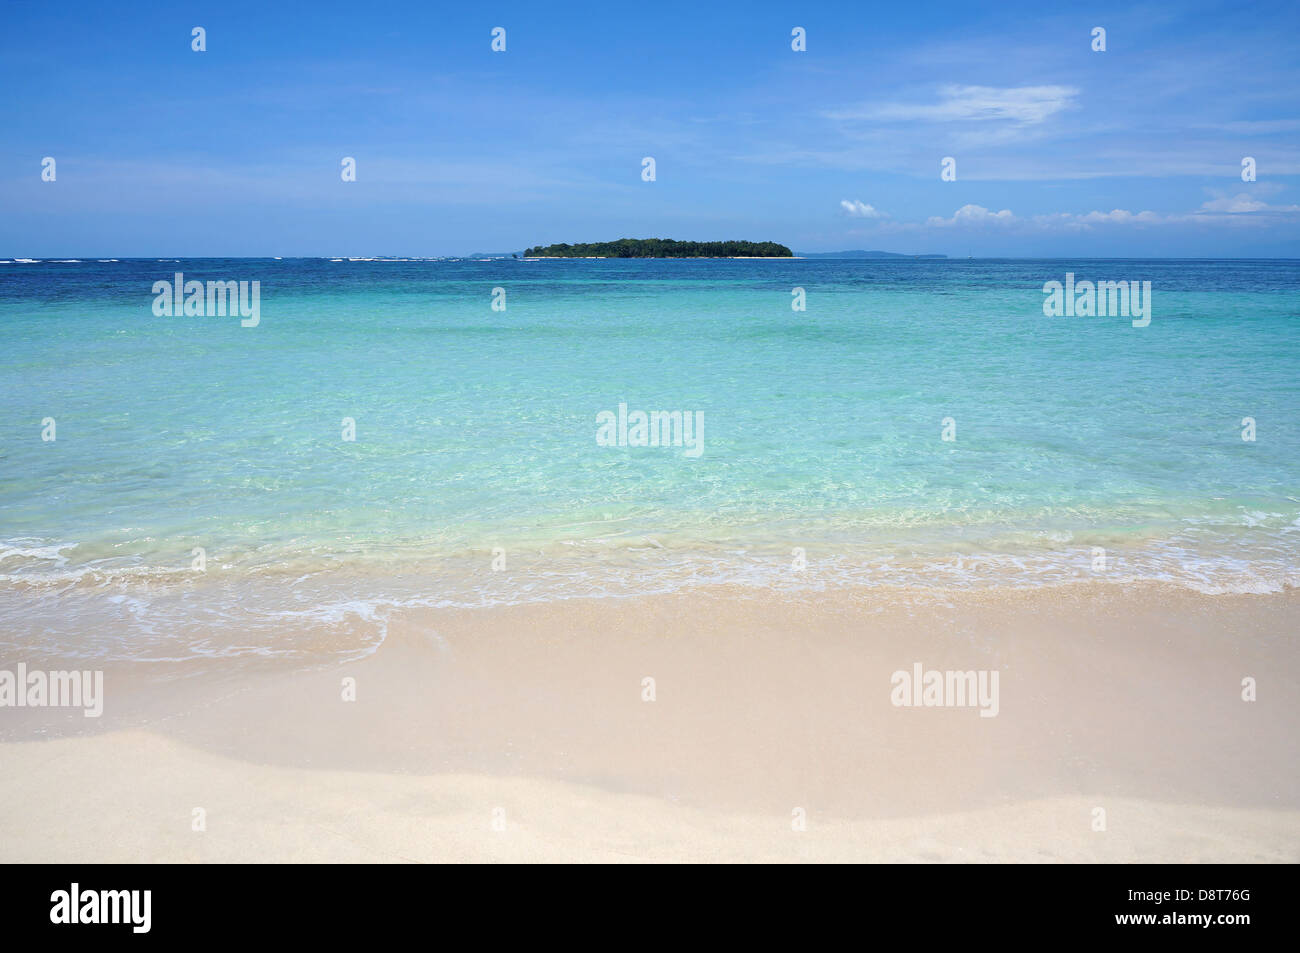 Tropical sandy beach shore with turquoise water and an island at the horizon, Caribbean sea Stock Photo